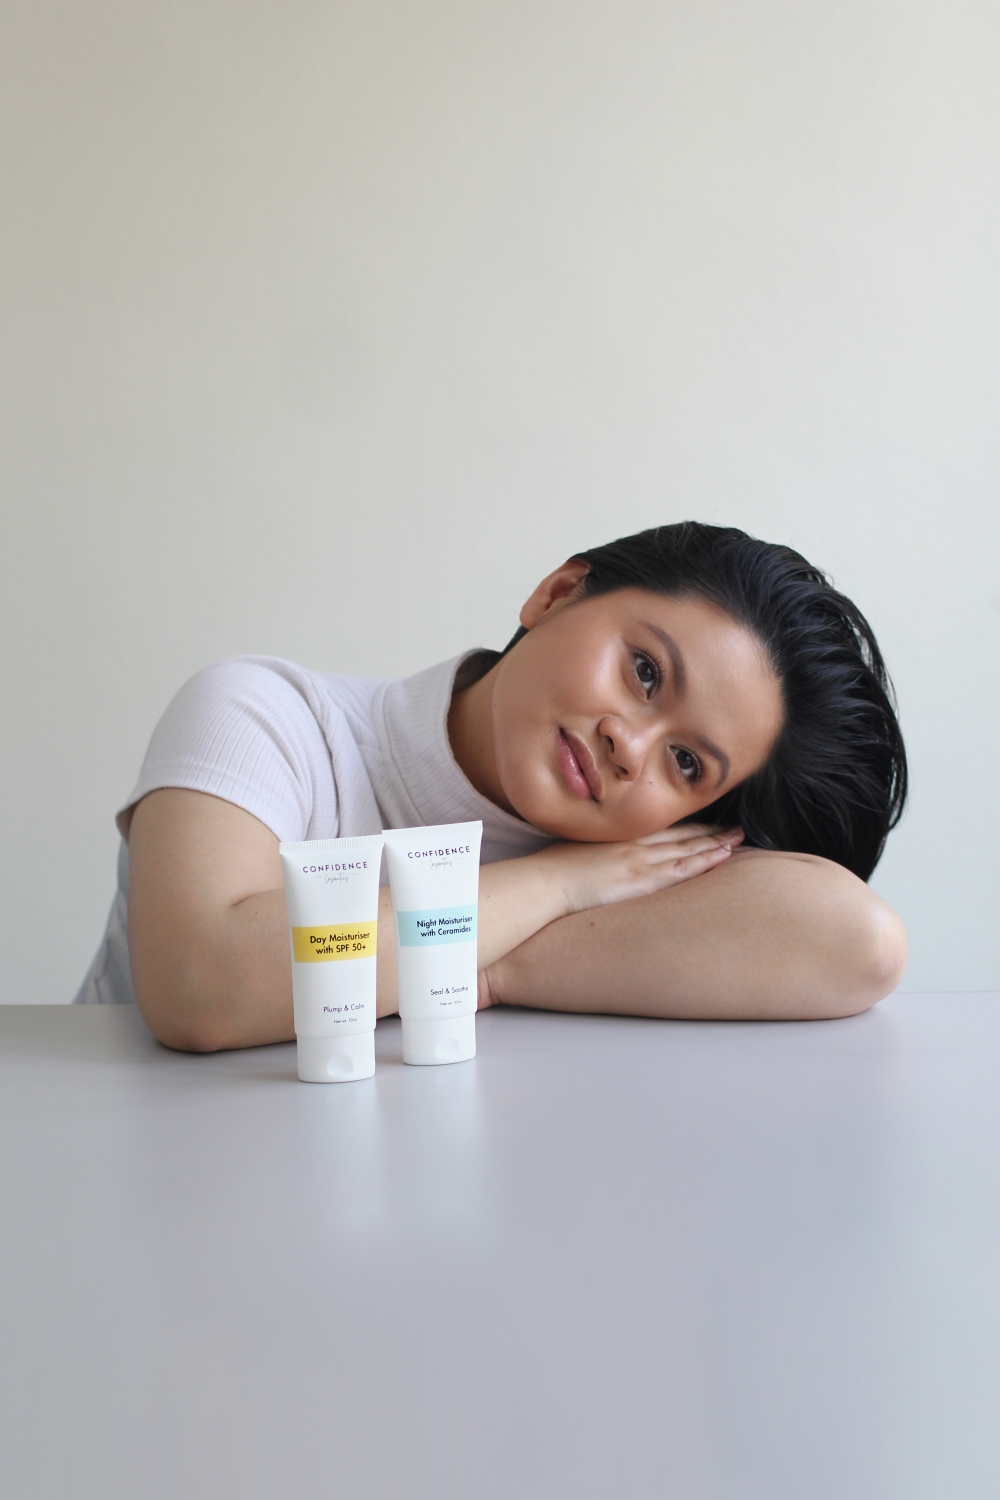 Sharifah Aryana with two of her products from Confidence Cosmetics. — Picture courtesy of Sharifah Aryana